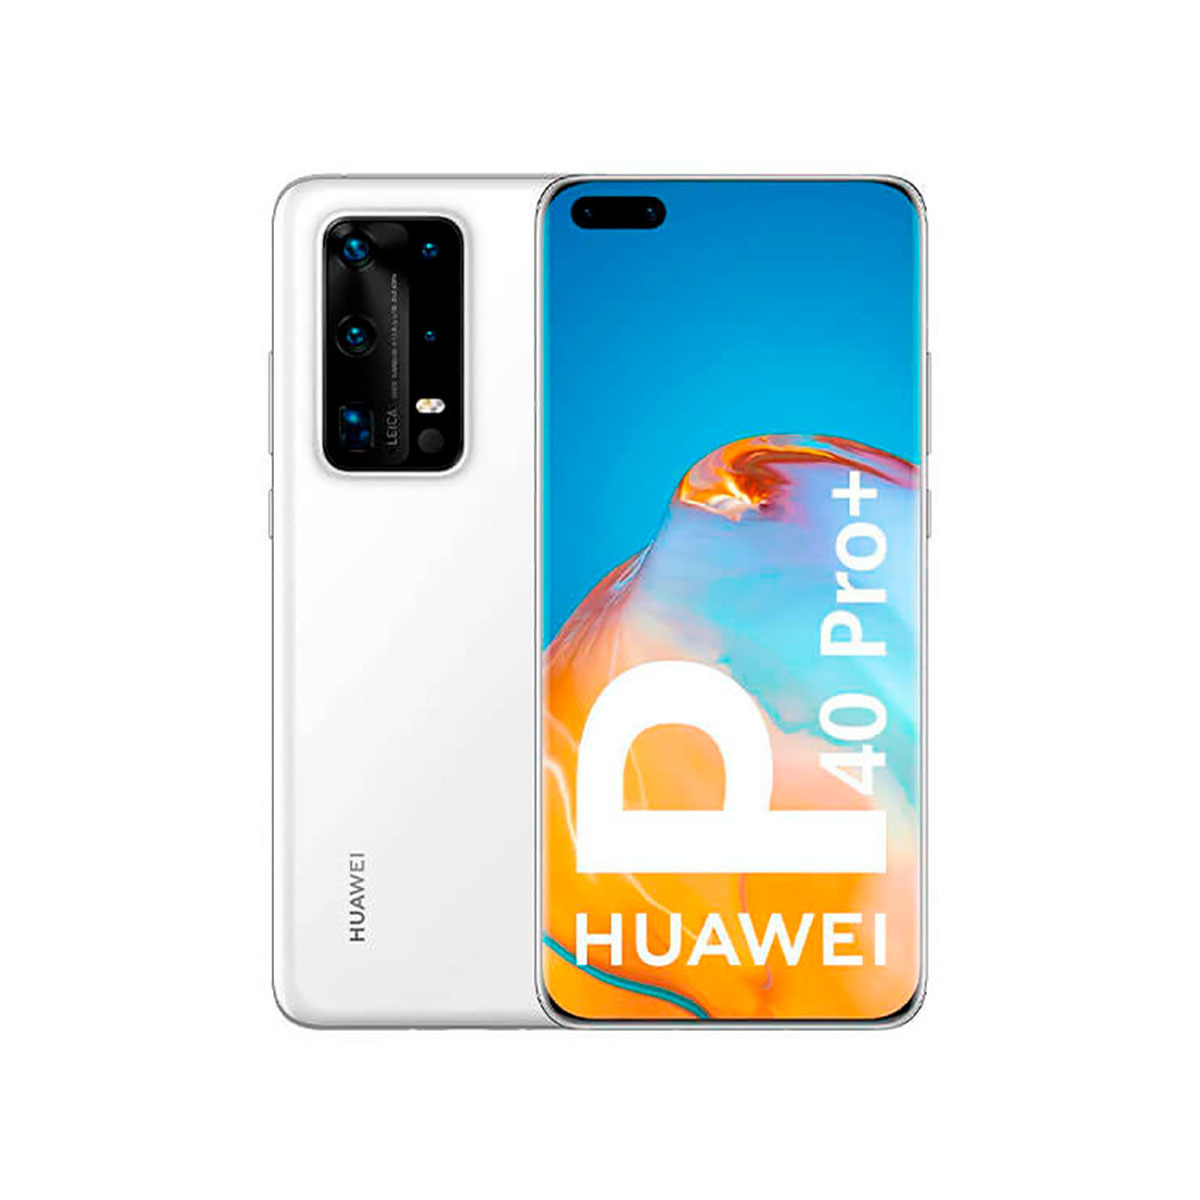 Smartphone Android Huawei Huawei P40 Pro Plus 5G 8Go/512Go Blanc (Céramique Blanche) Double SIM